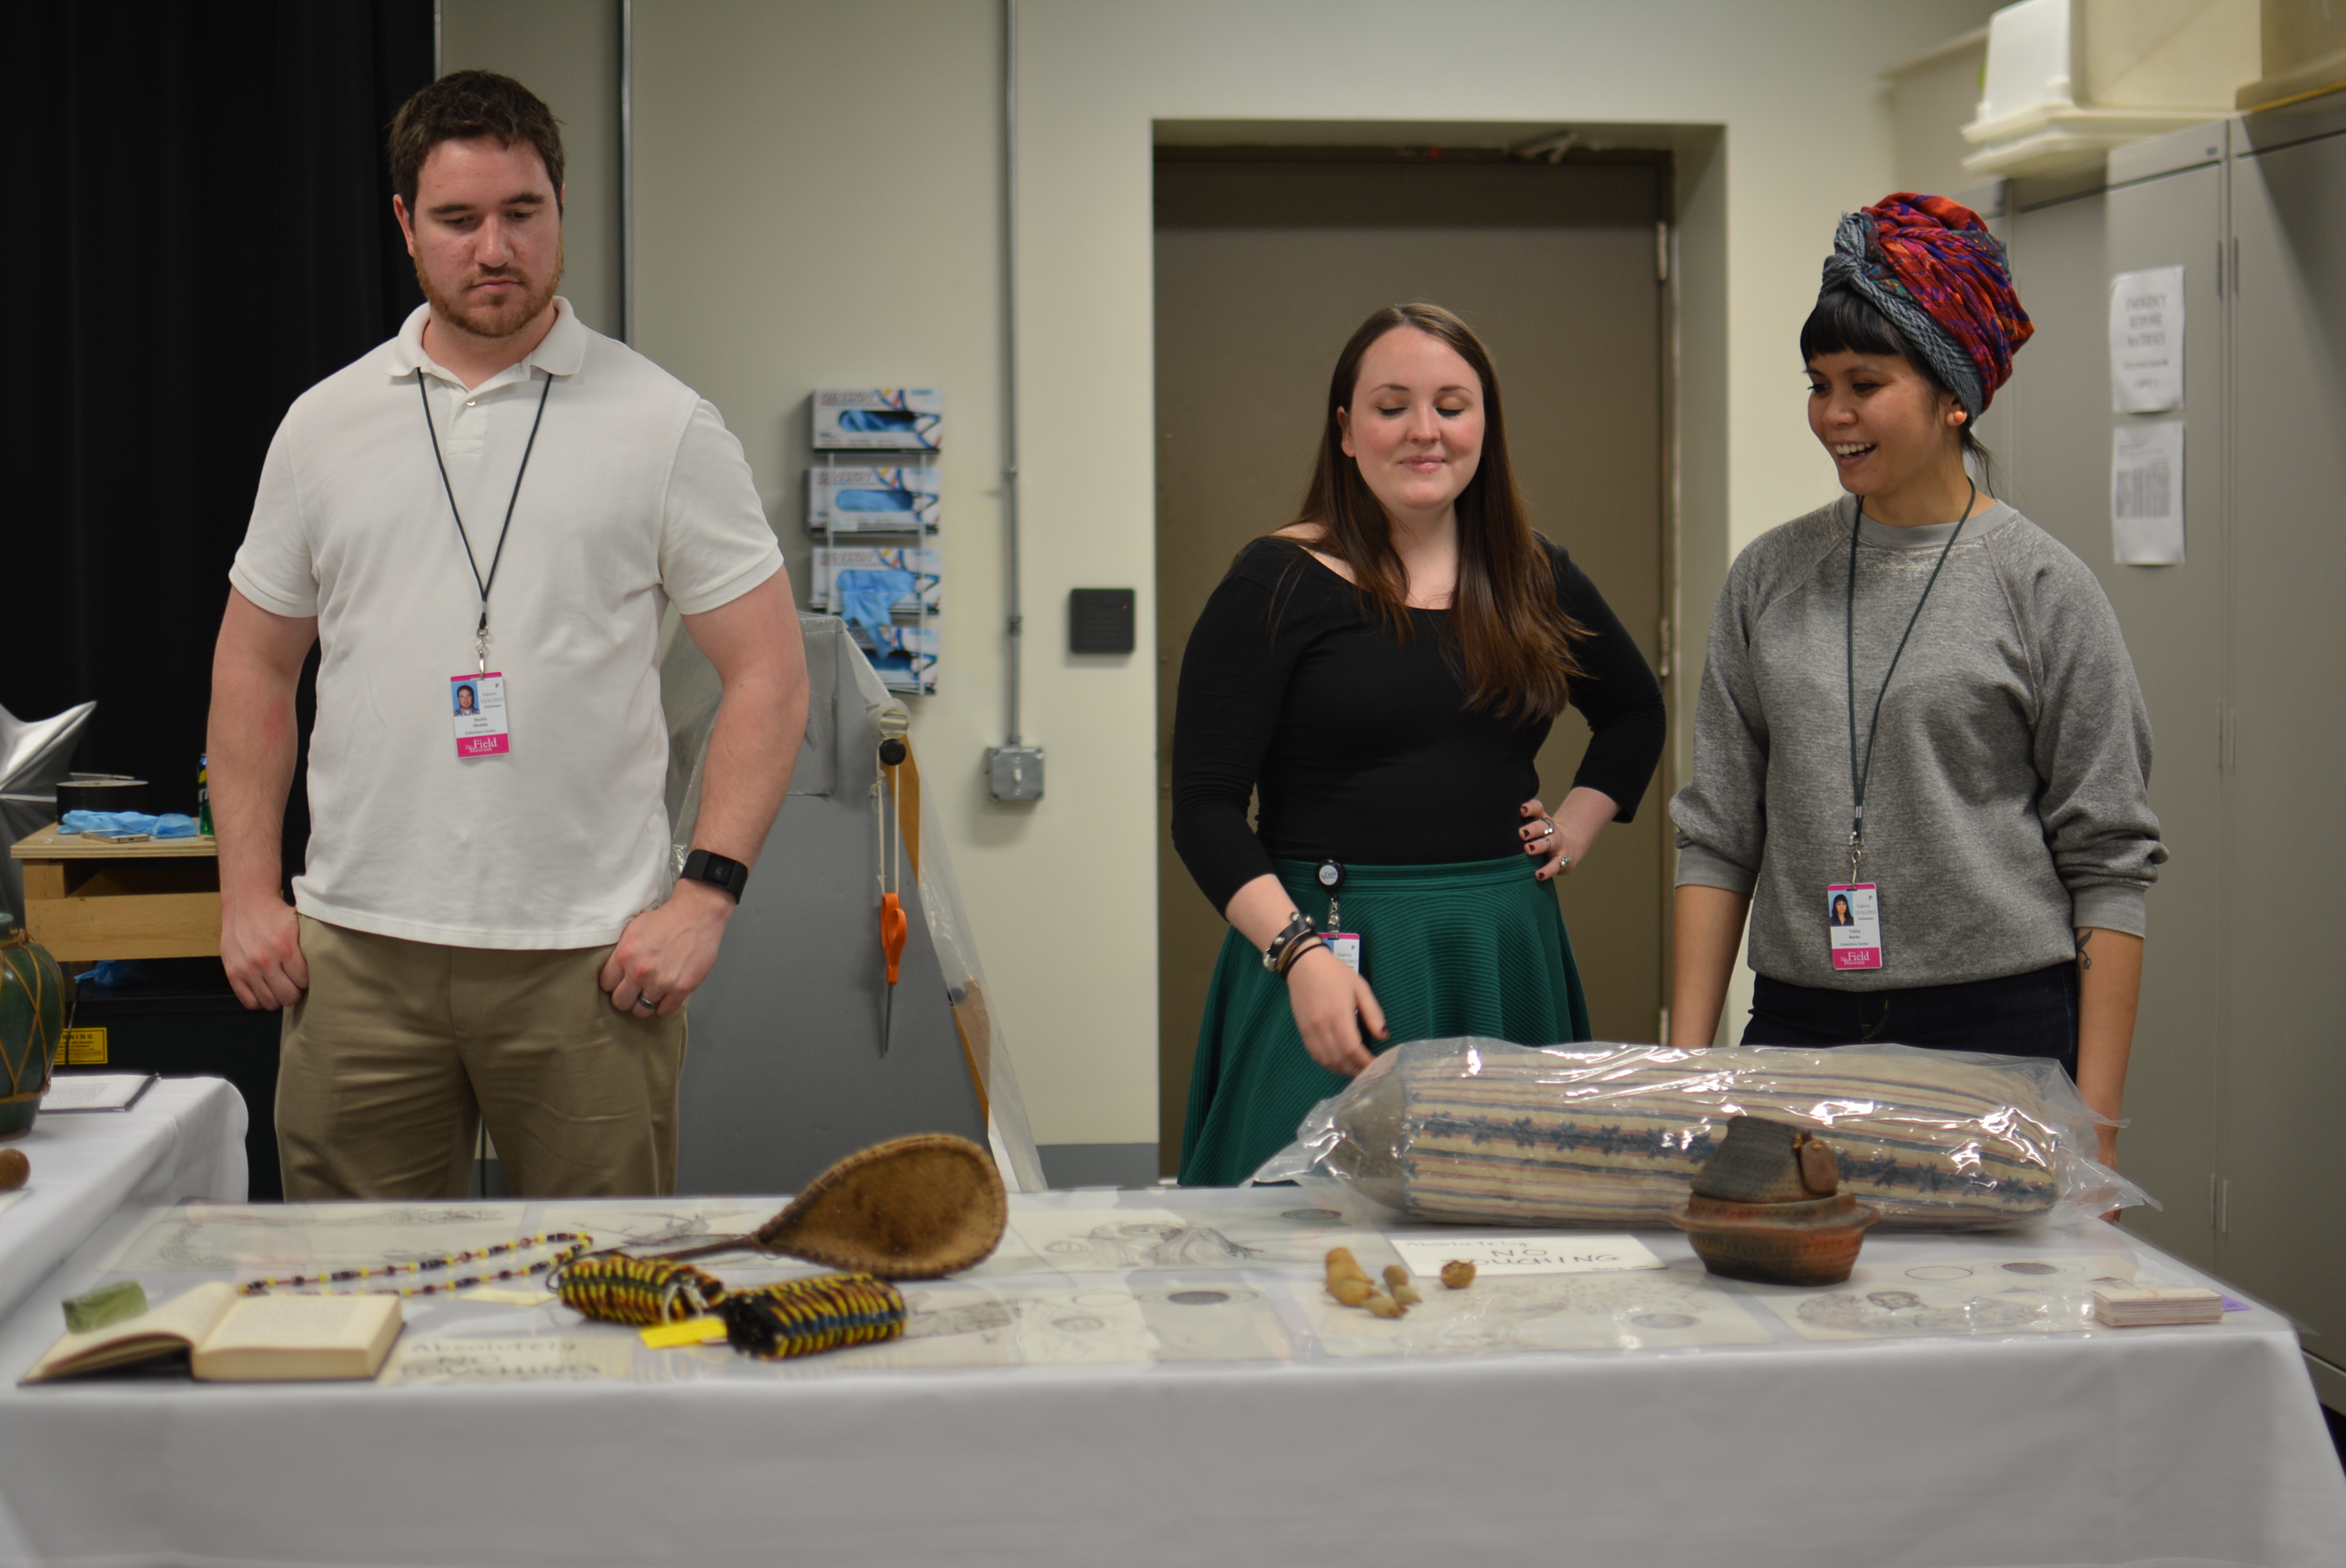 Members of the Digital Co-Curation team staffing tables for their presentation. (c) Field Museum of Natural History - CC BY-NC 4.0